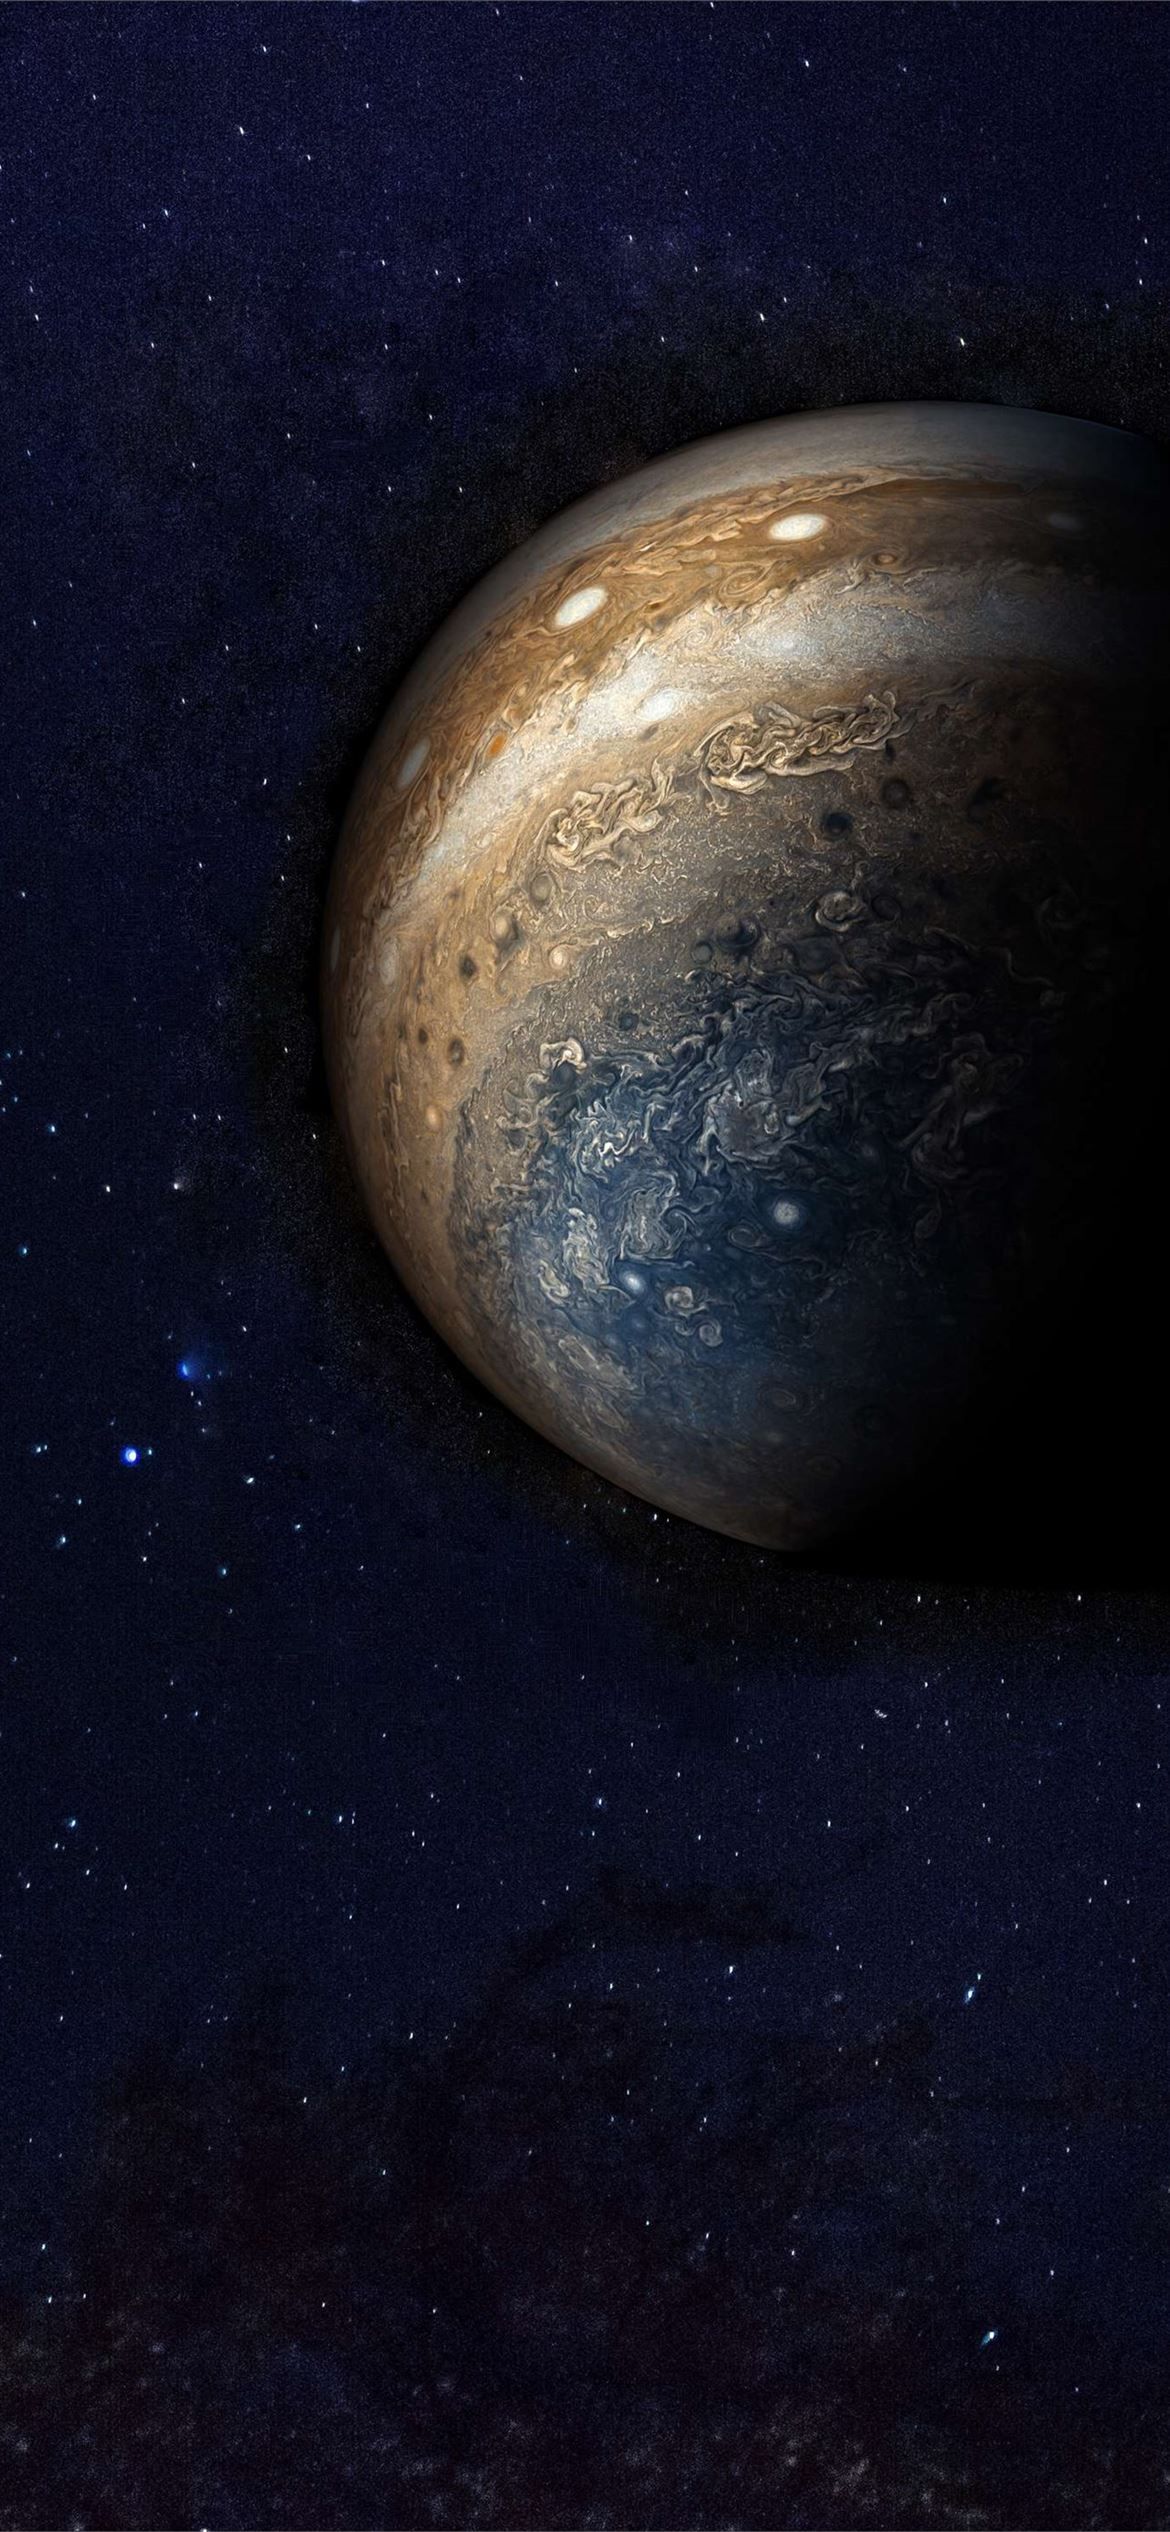 Jupiter in the night sky wallpaper 1242x2688 for iPhone X - Galaxy